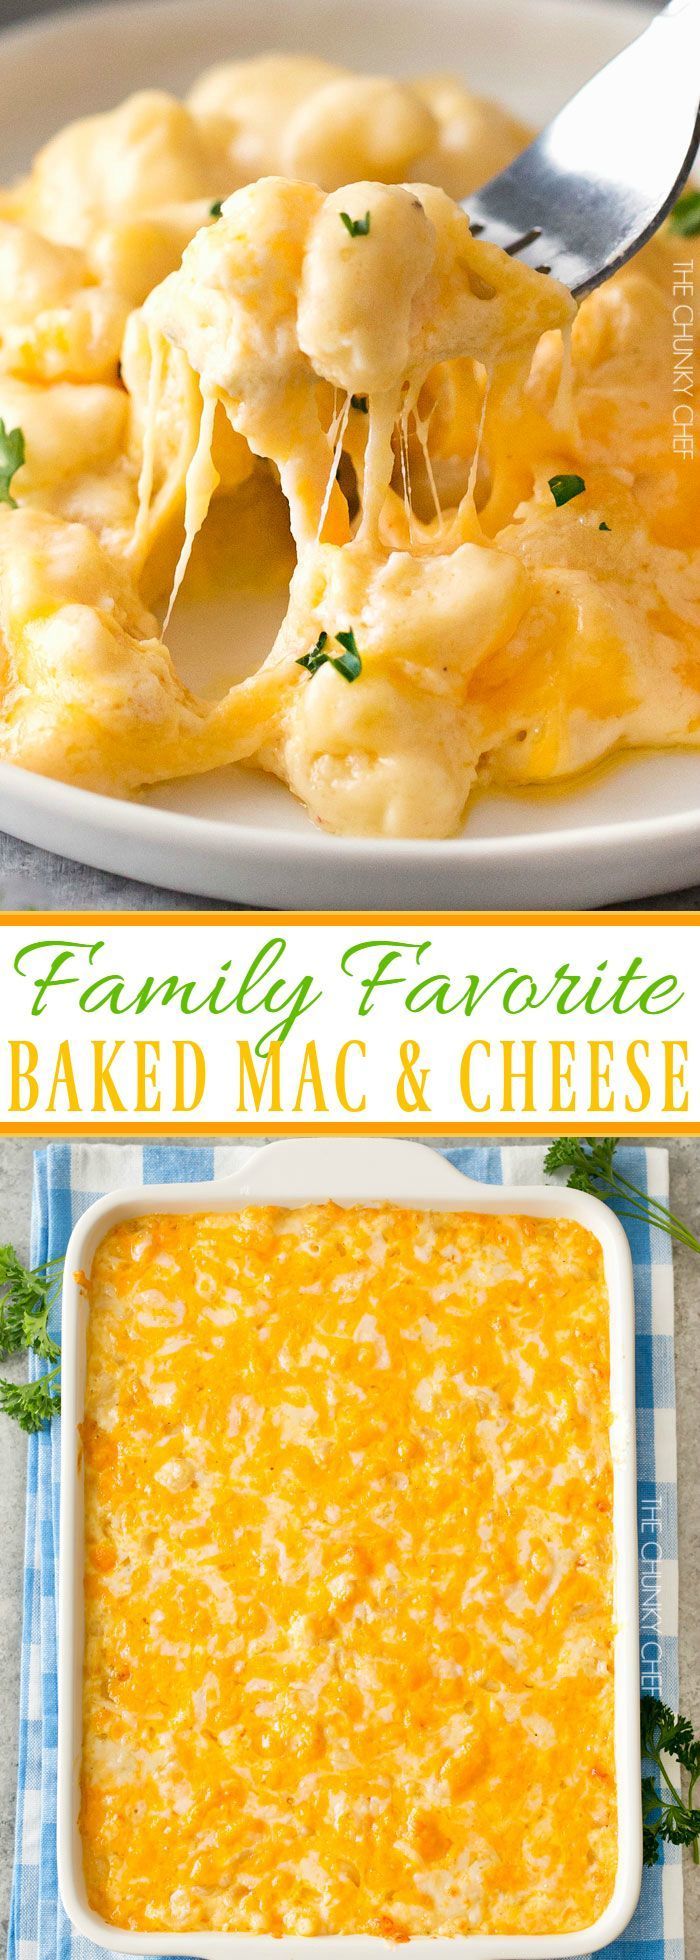 Family Favorite Baked Mac and Cheese | Rich and creamy baked mac and cheese, filled with multiple layers of shredded cheeses and